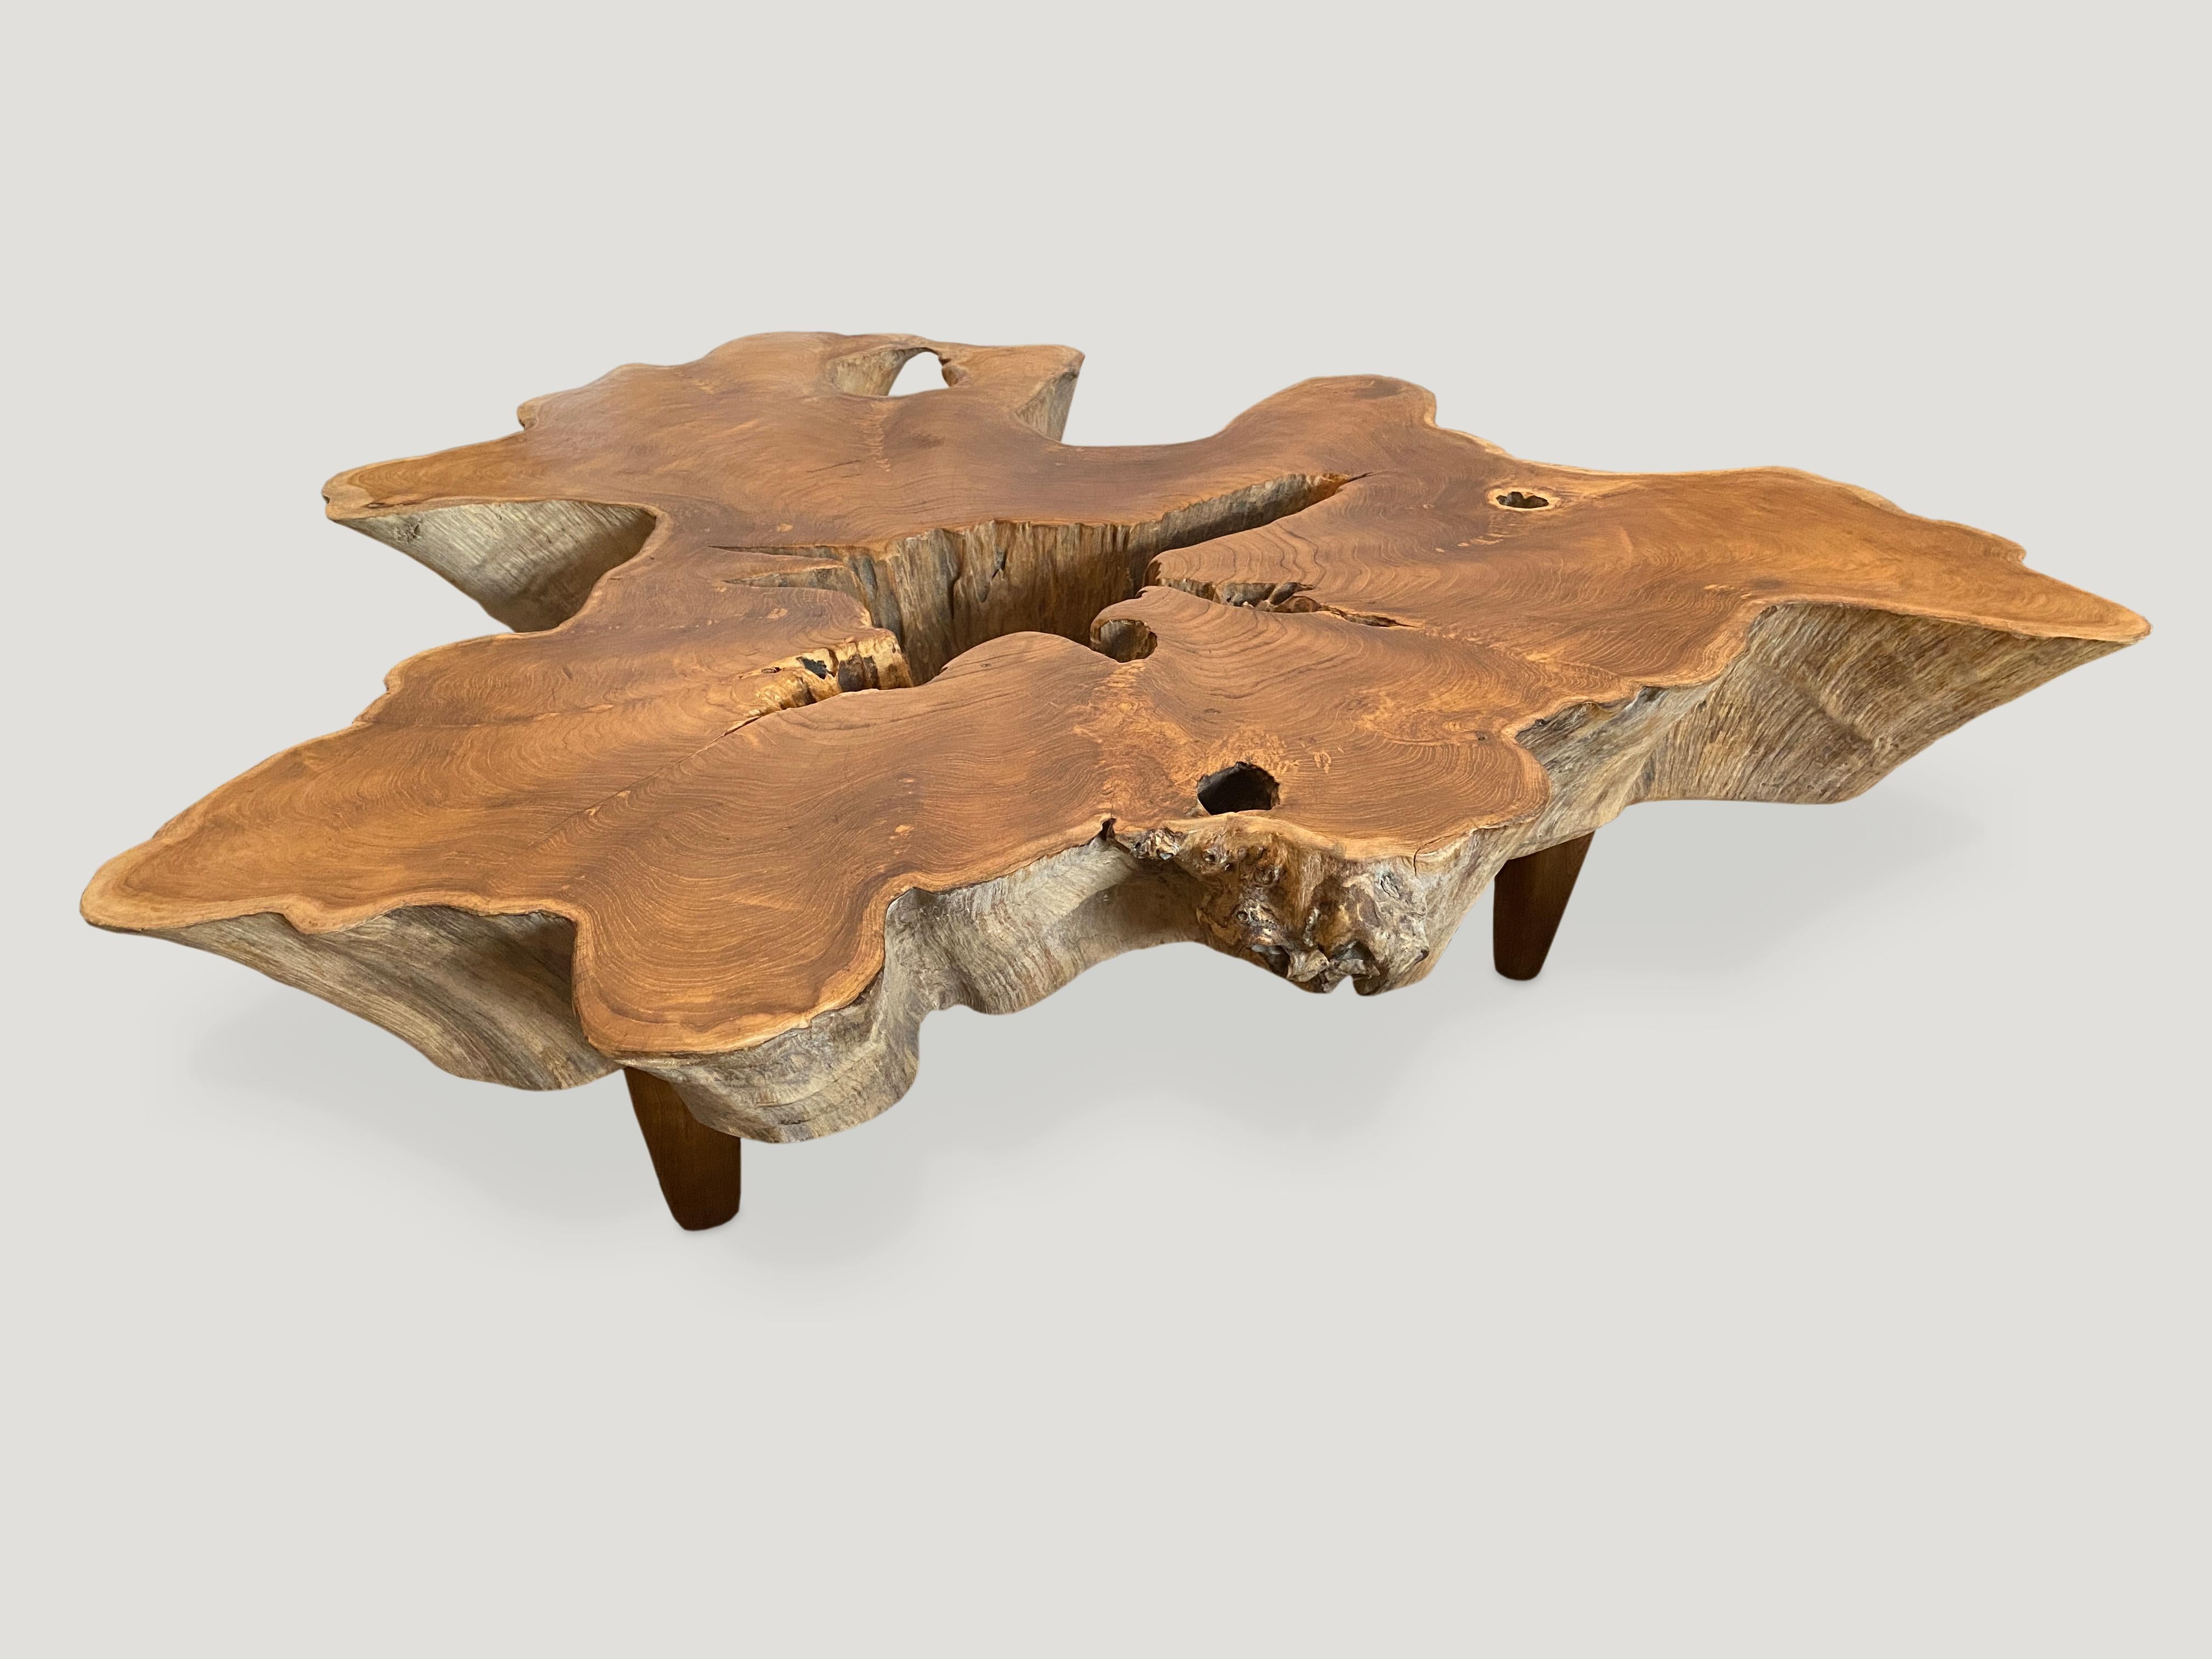 Impressive reclaimed six inch thick teak root coffee table. The top is polished with a natural oil finish and the sides left raw. Floating on midcentury style cone shaped legs. Organic with a twist.

Andrianna Shamaris. The Leader In Modern